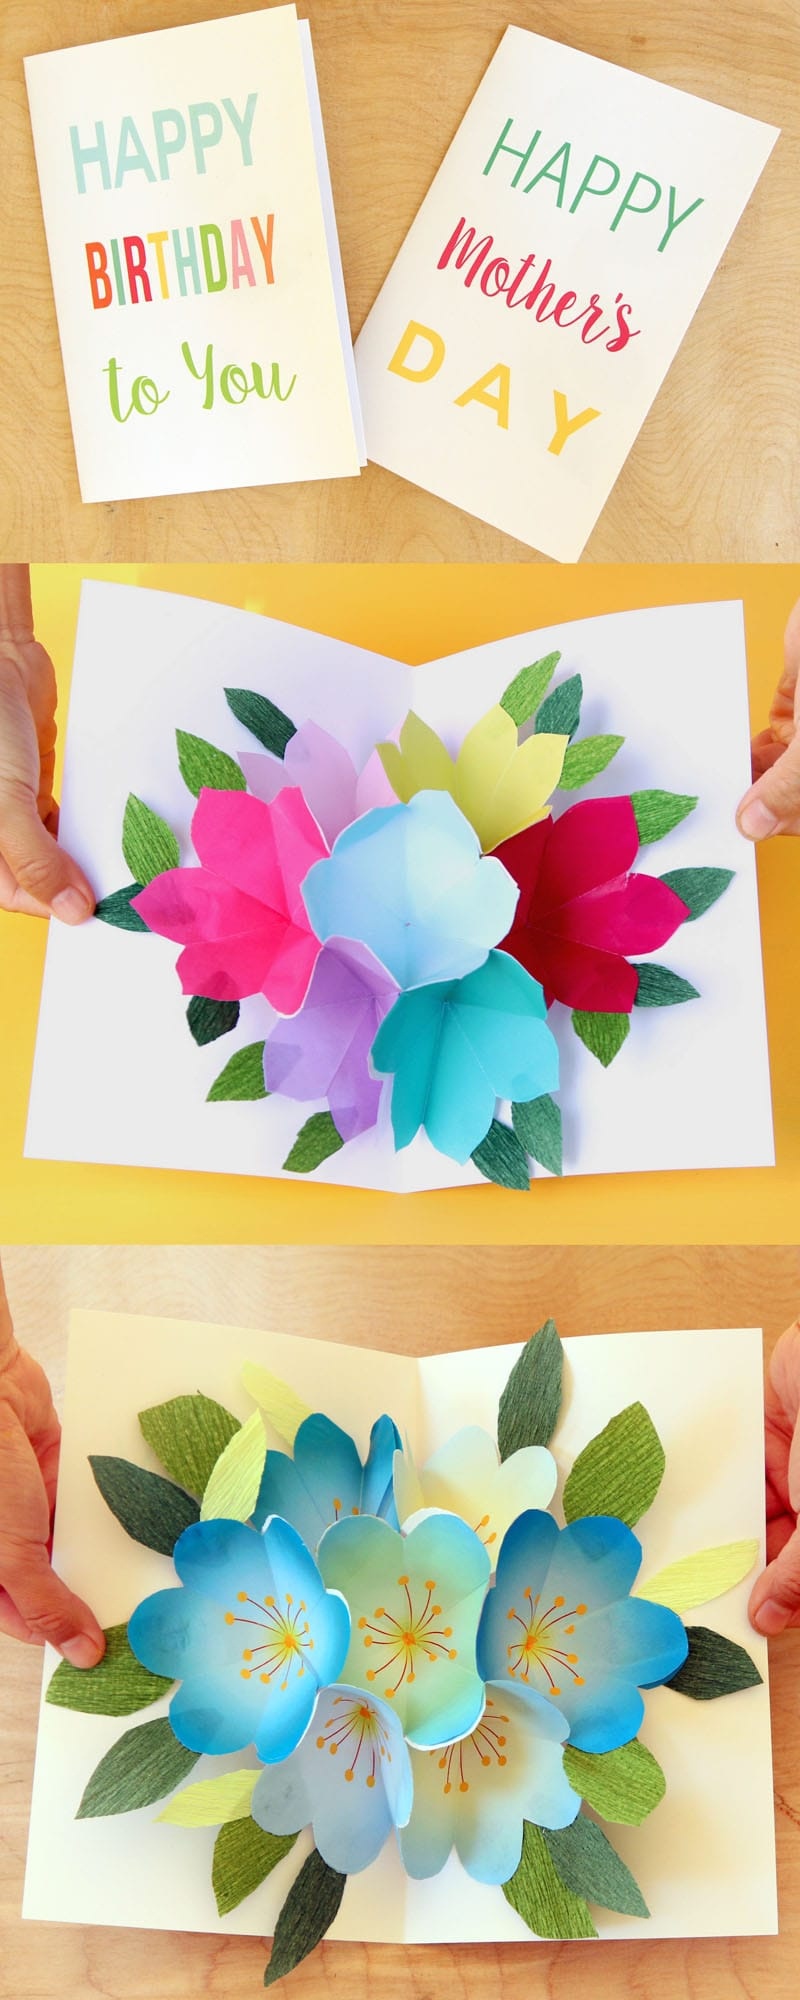 Free Printable Happy Birthday Card With Pop Up Bouquet - A Piece Of - Free Printable Birthday Cards For Mom